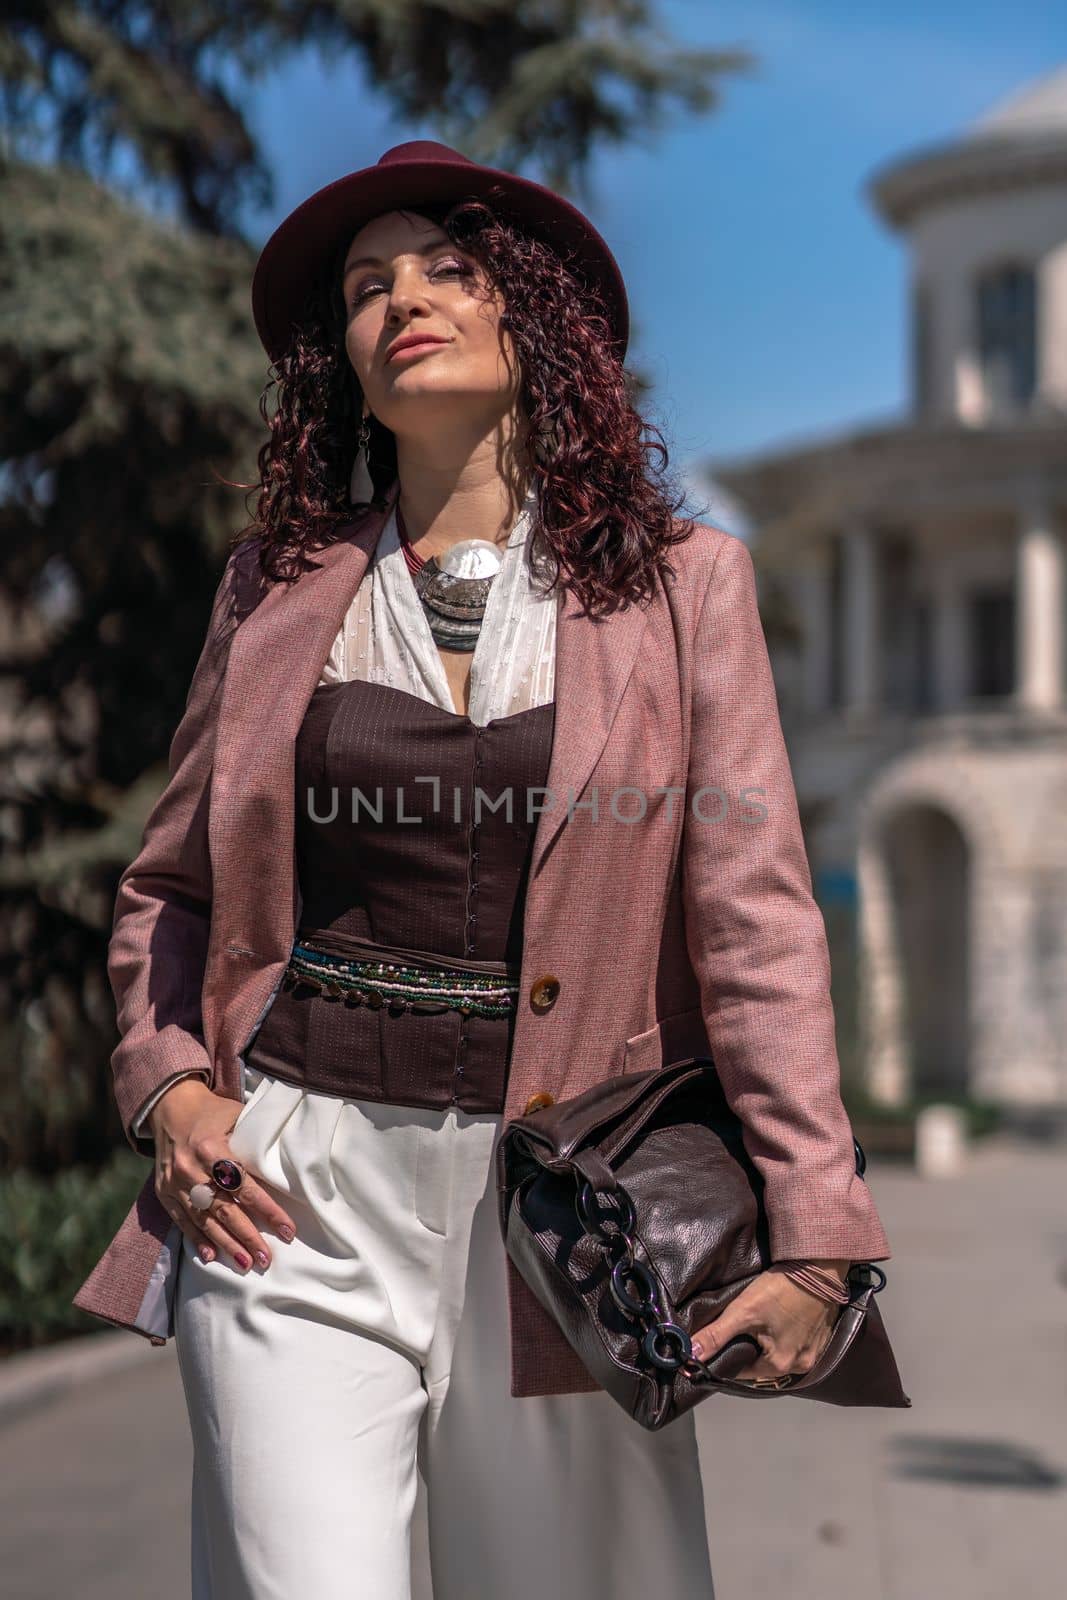 Woman park city. Stylish woman in a hat walks in a park in the city. Dressed in white corset trousers and a pink jacket with a bag in her hands. by Matiunina